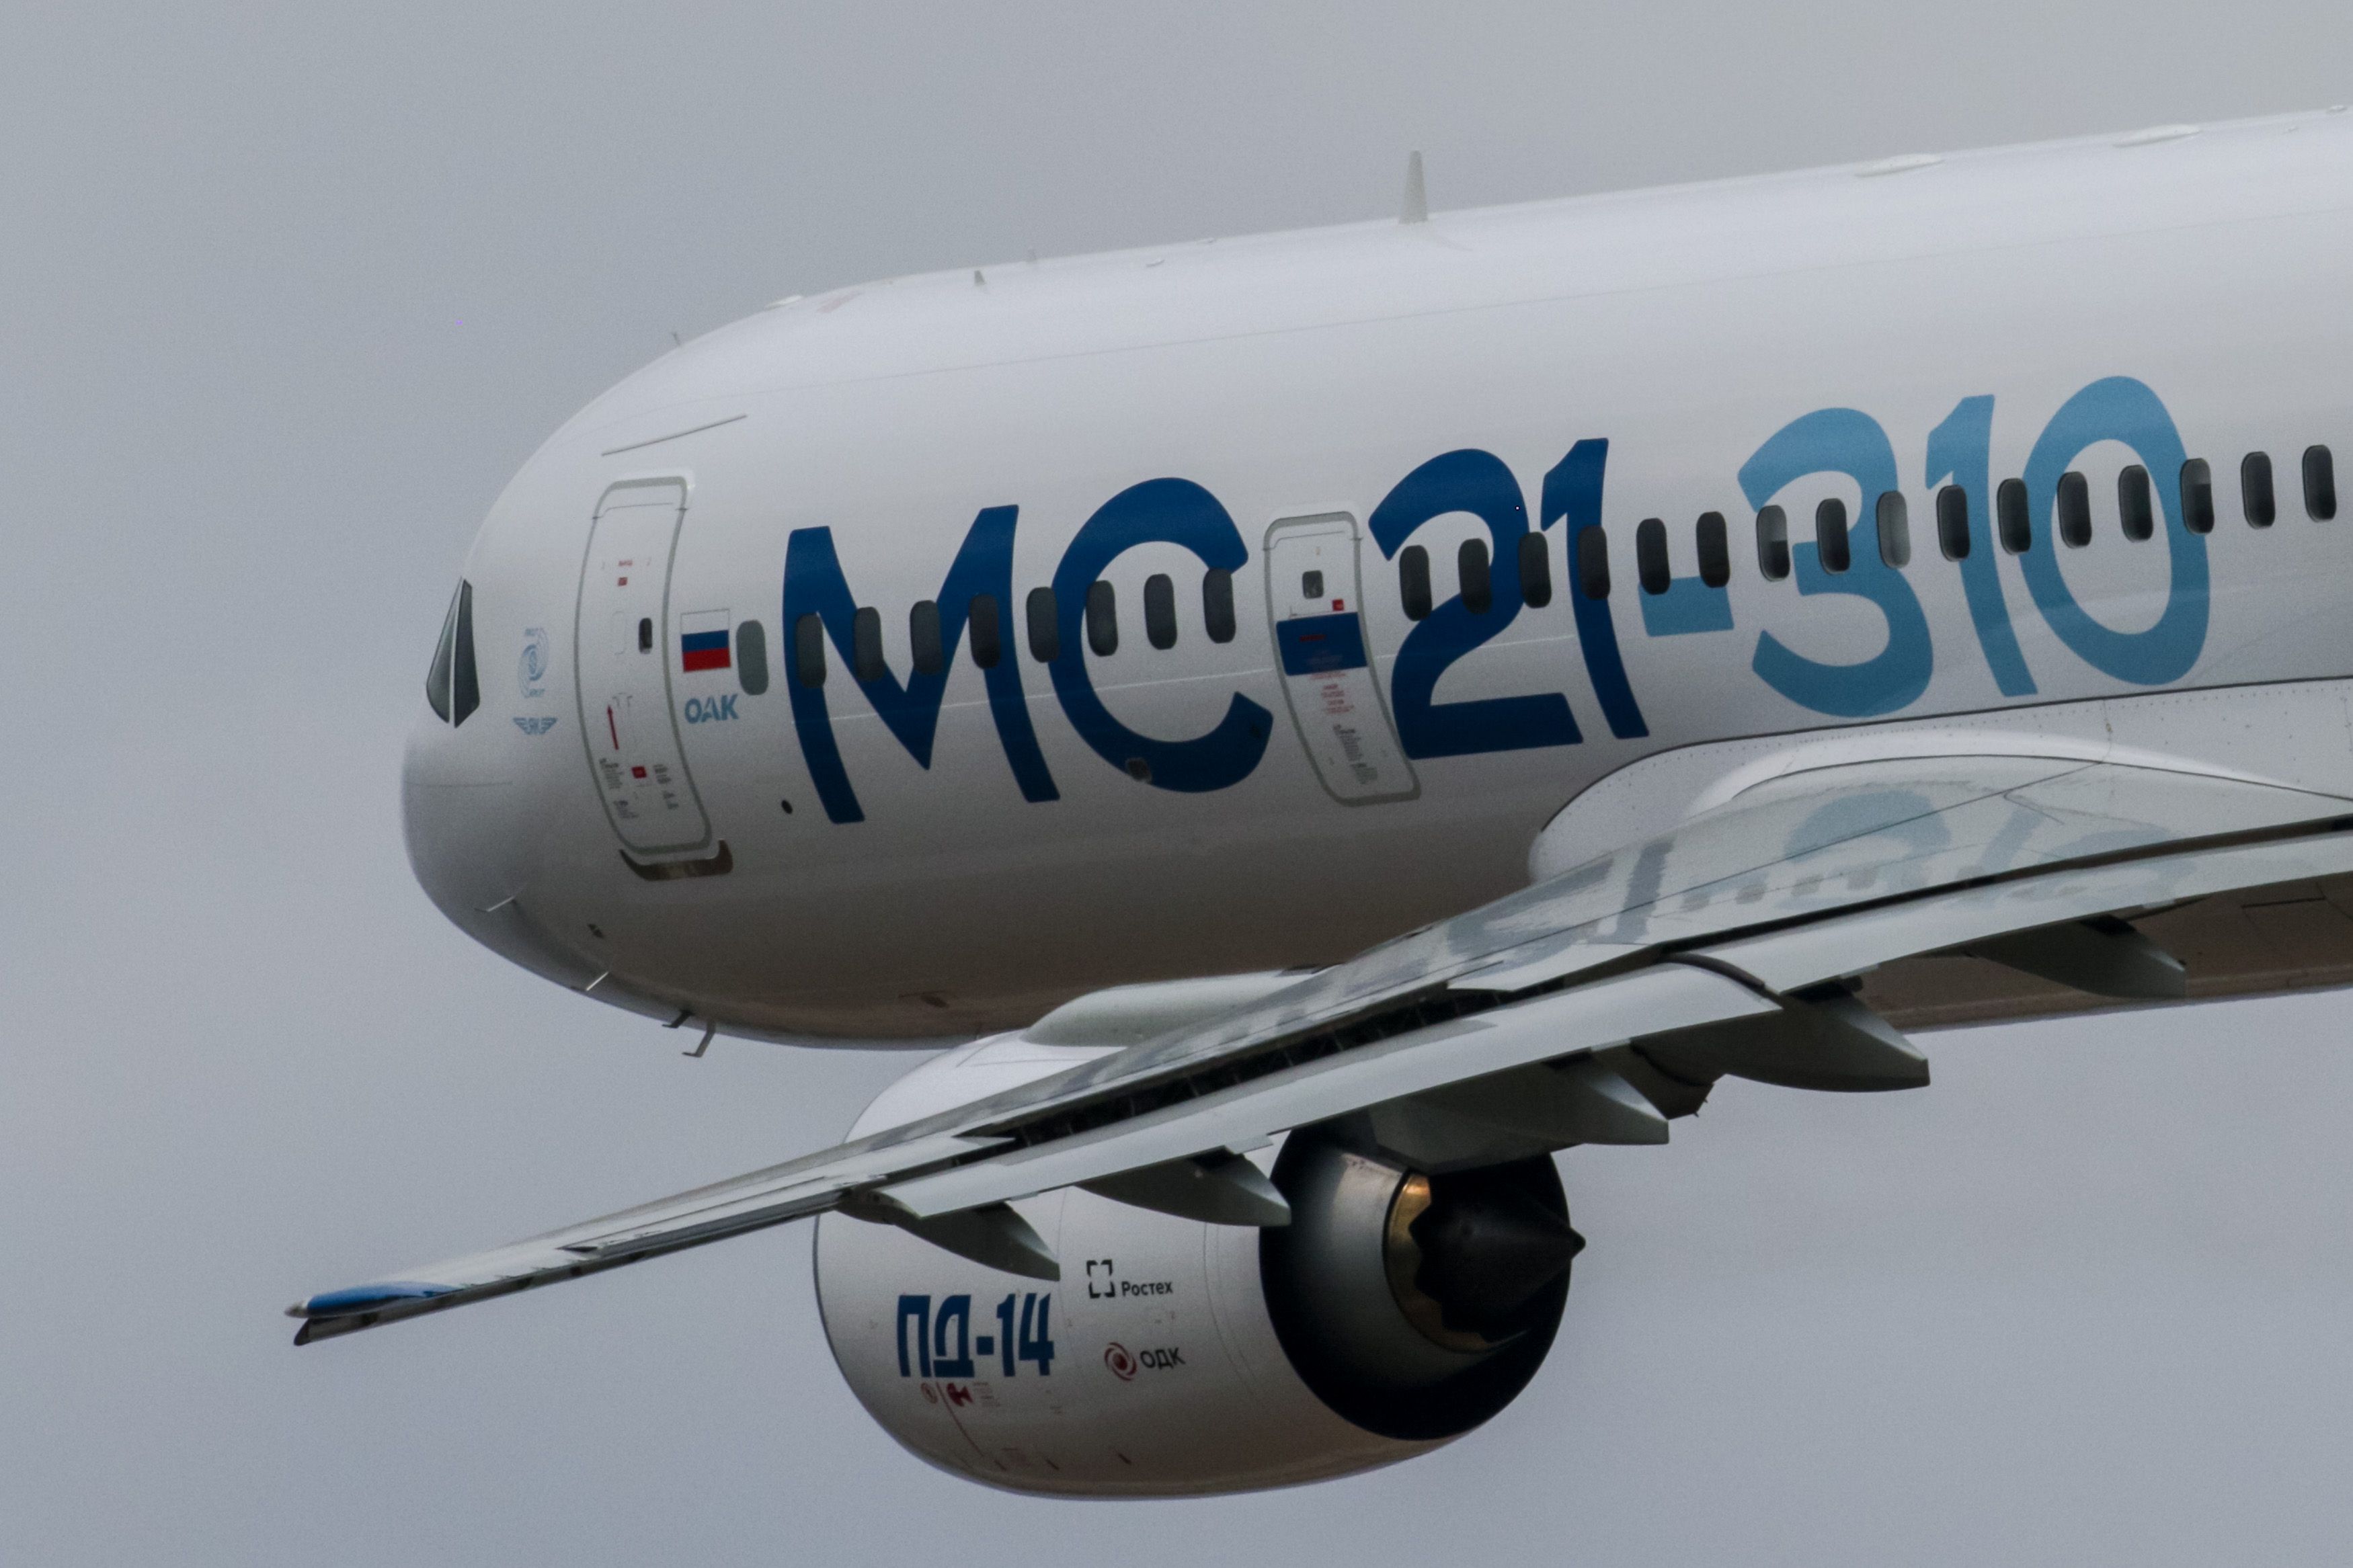 MC-21-300 aircraft fitted with PD-14 engines